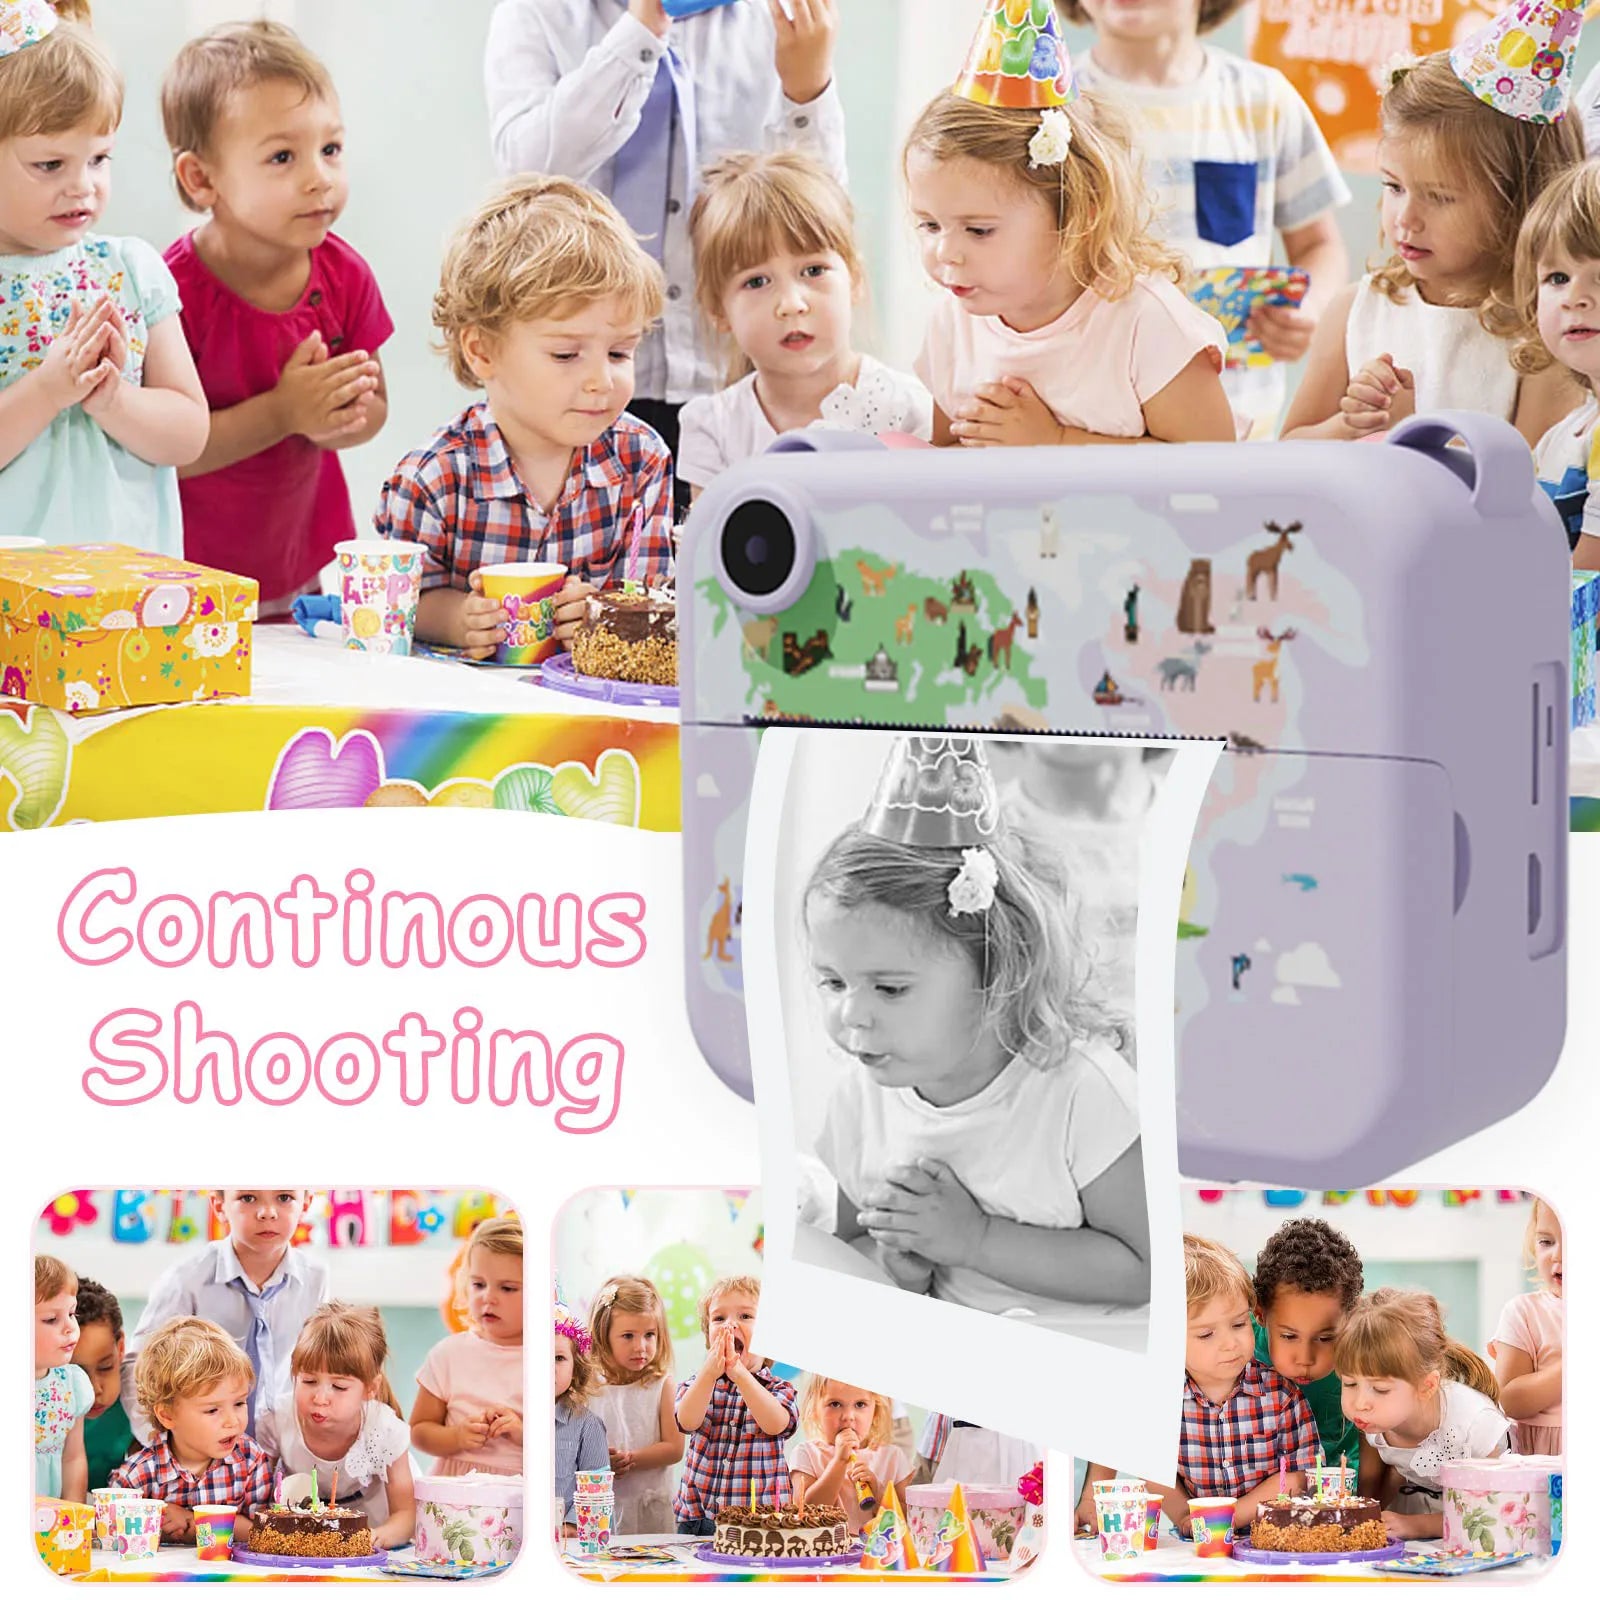 Kids Camera Instant Print Christmas Birthday Gifts for 3-12 Year Old Boys Girls Toys for Kids Age 3-10 with 3 Rolls Print Paper